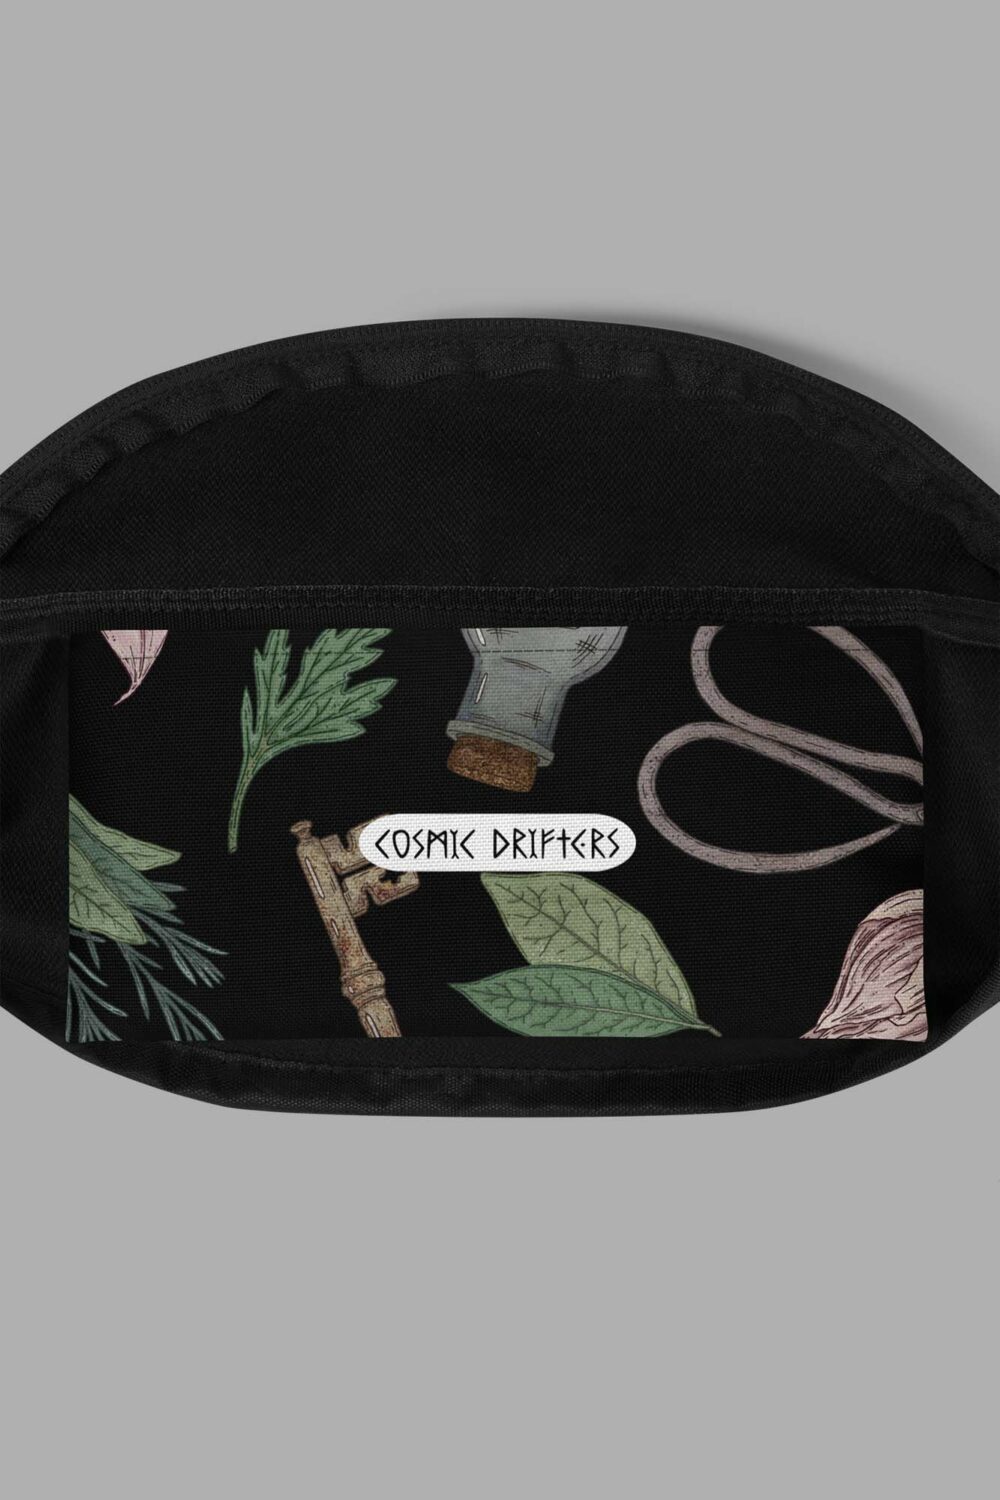 cosmic drifters forest witch print fanny pack pocket